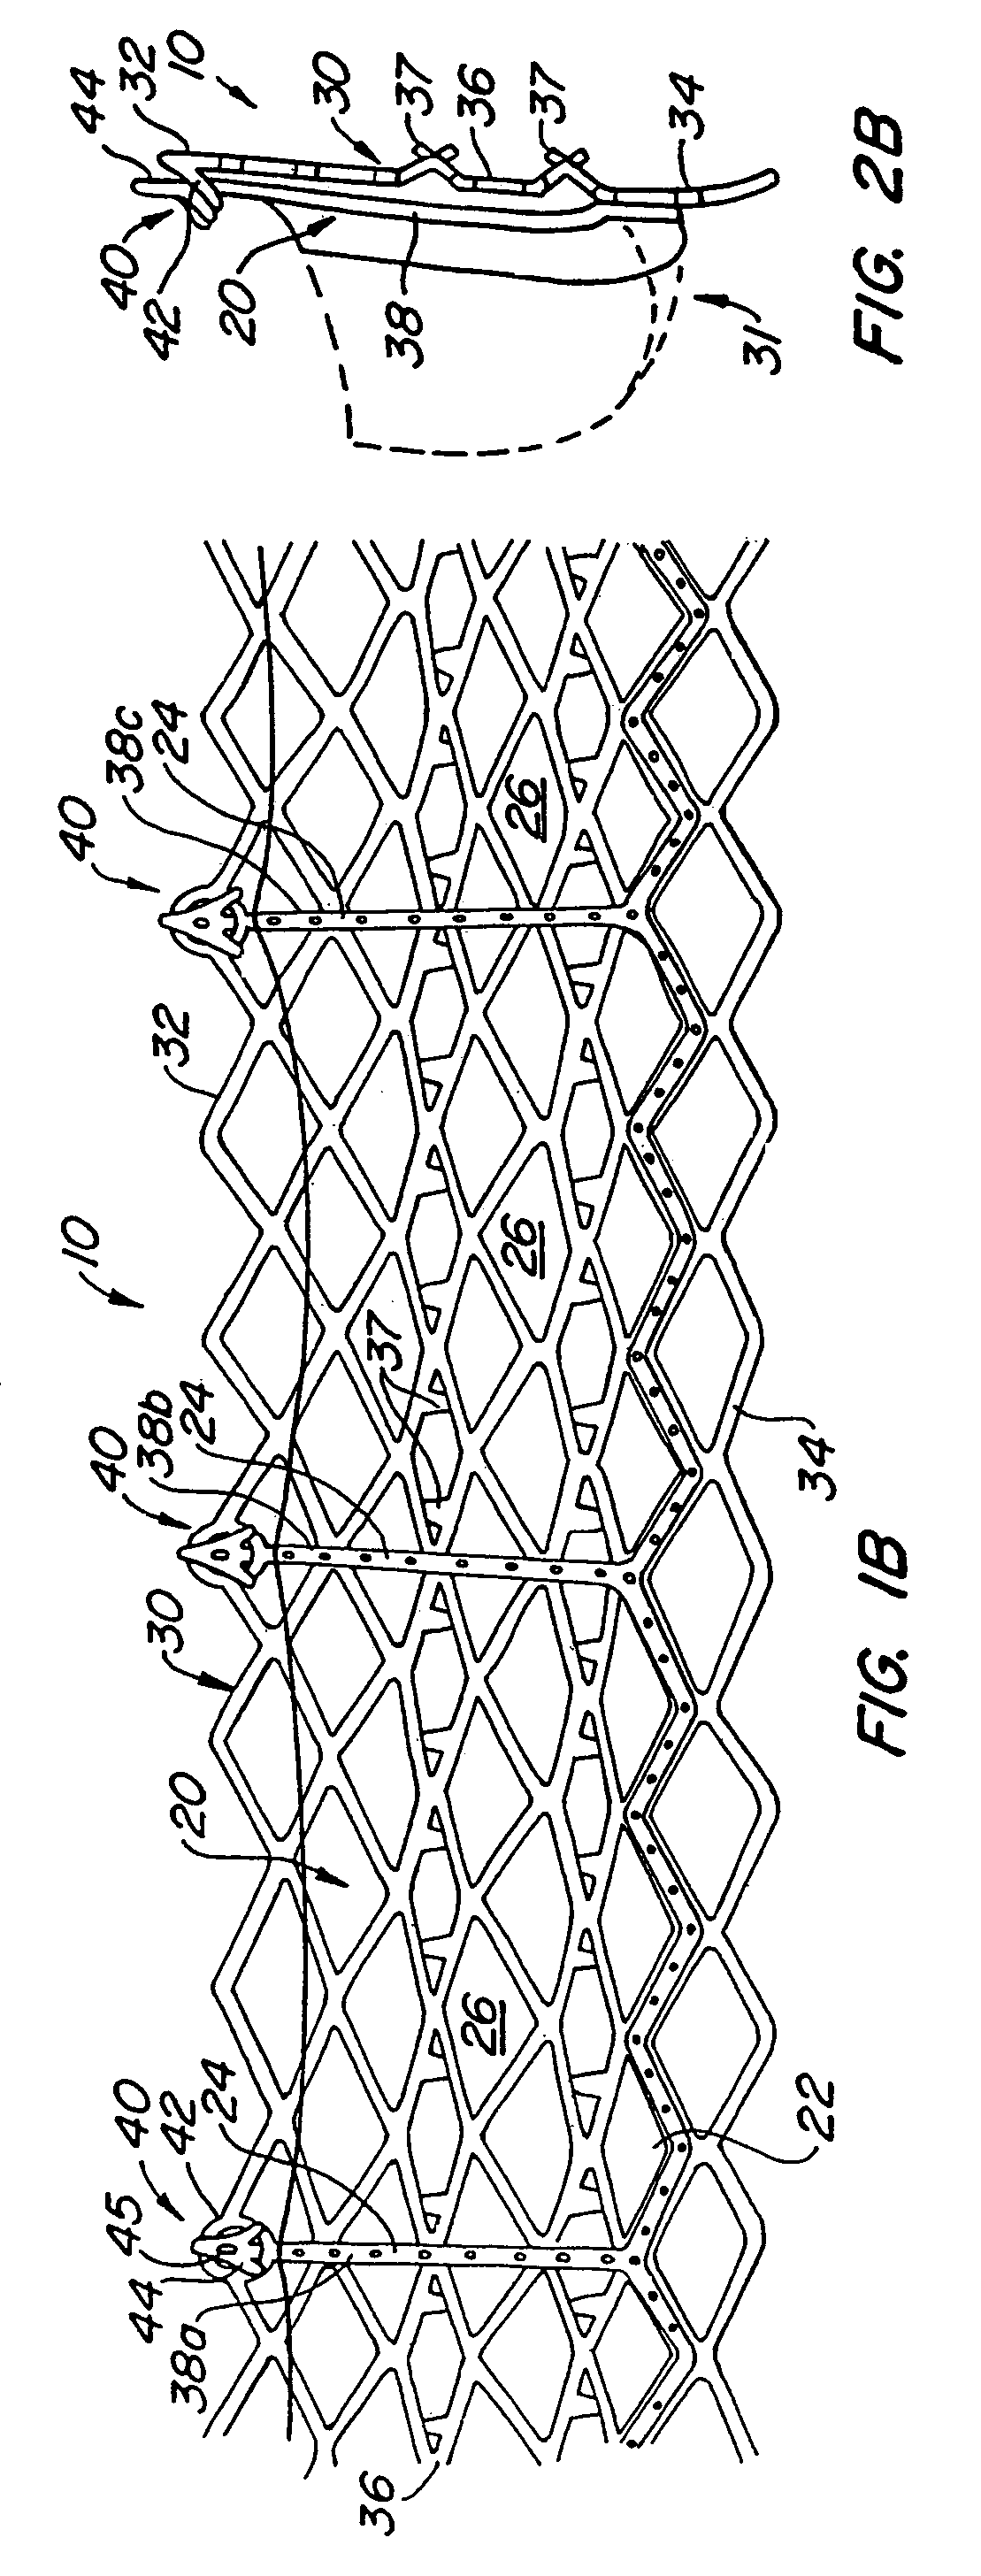 Low profile heart valve and delivery system